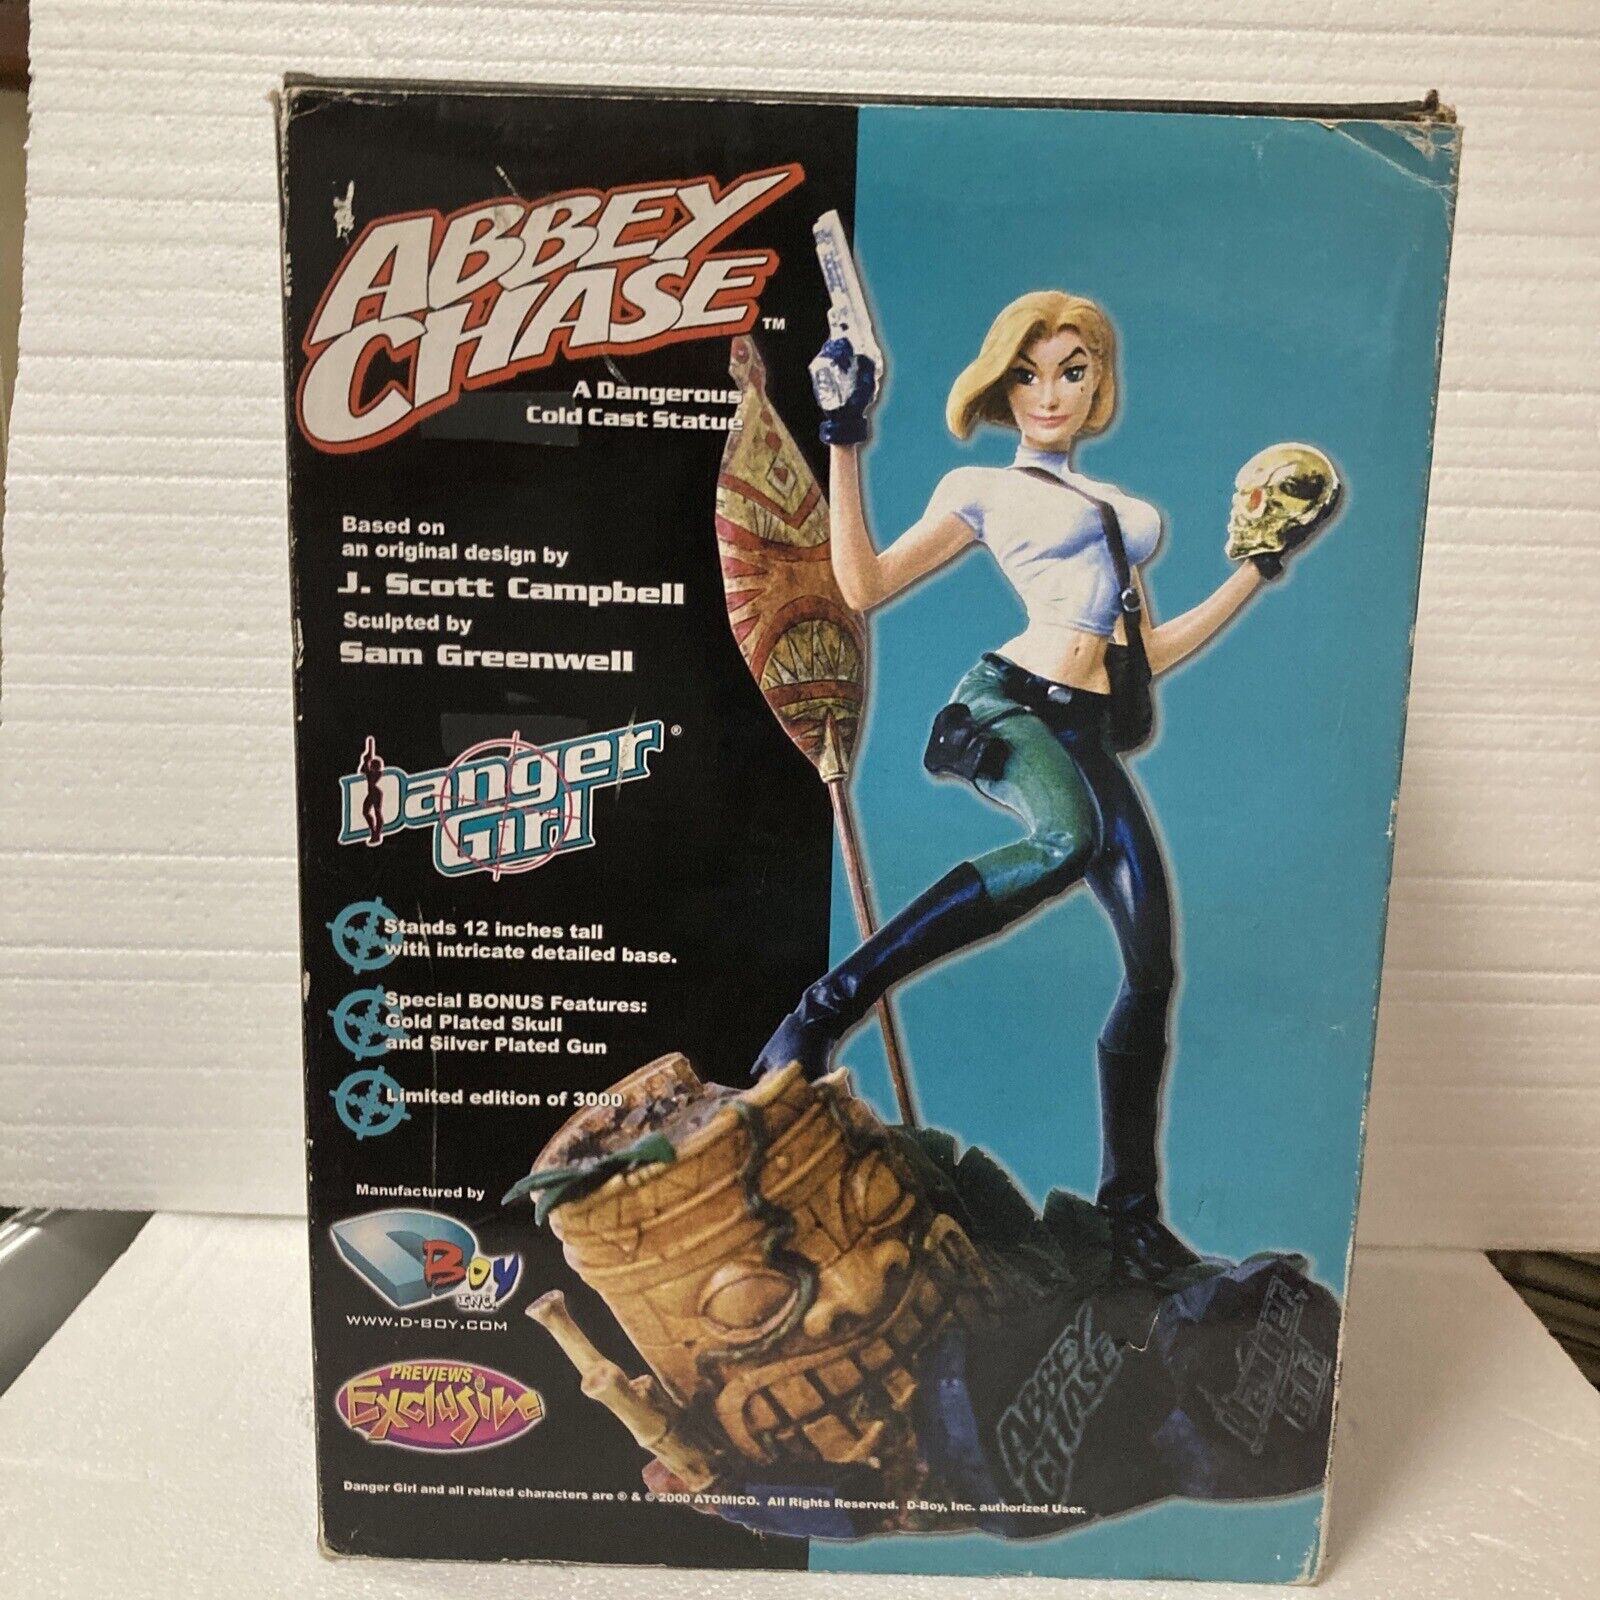 Danger Girl Abbey Chase Previews Exclusive Statue, D-Boy 2000